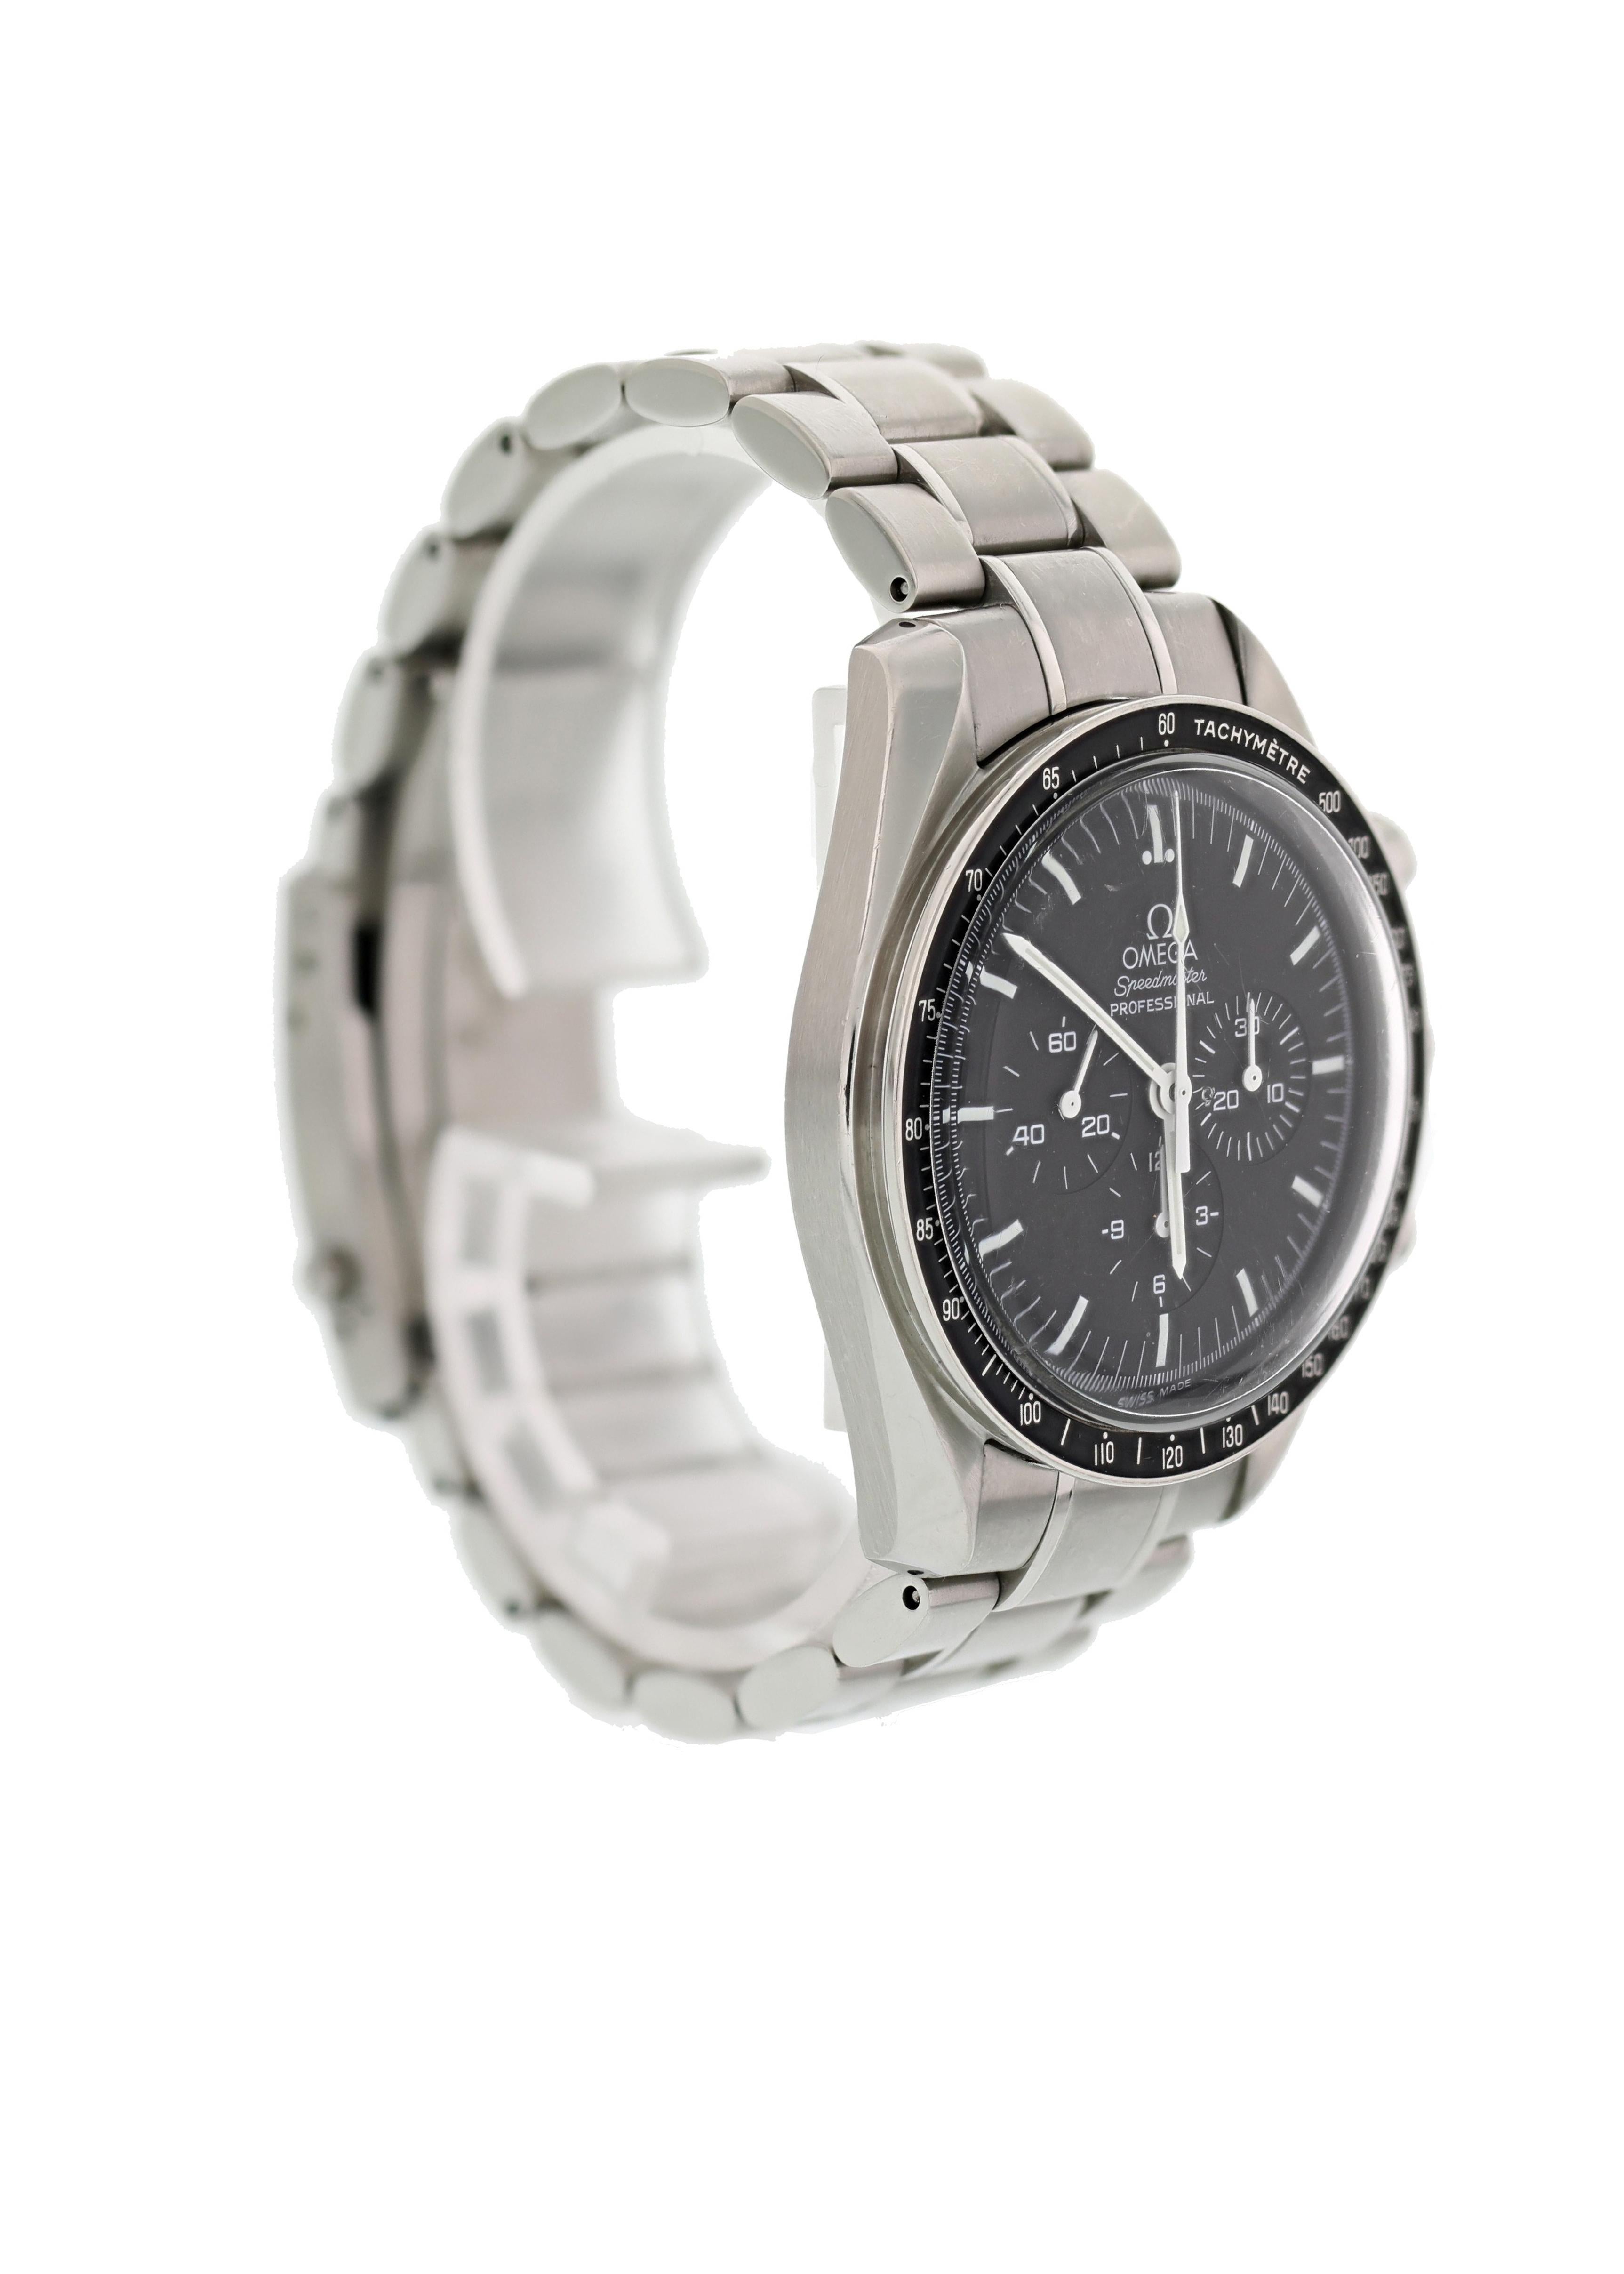 Omega Speedmaster Professional Moonwatch 3570.50.00. 42mm stainless steel case with tachymeter bezel. Black dial with luminous hand and indexes. 3 sub-dials displaying seconds, minutes and hours. Stainless steel bracelet with fold over clasp. Will